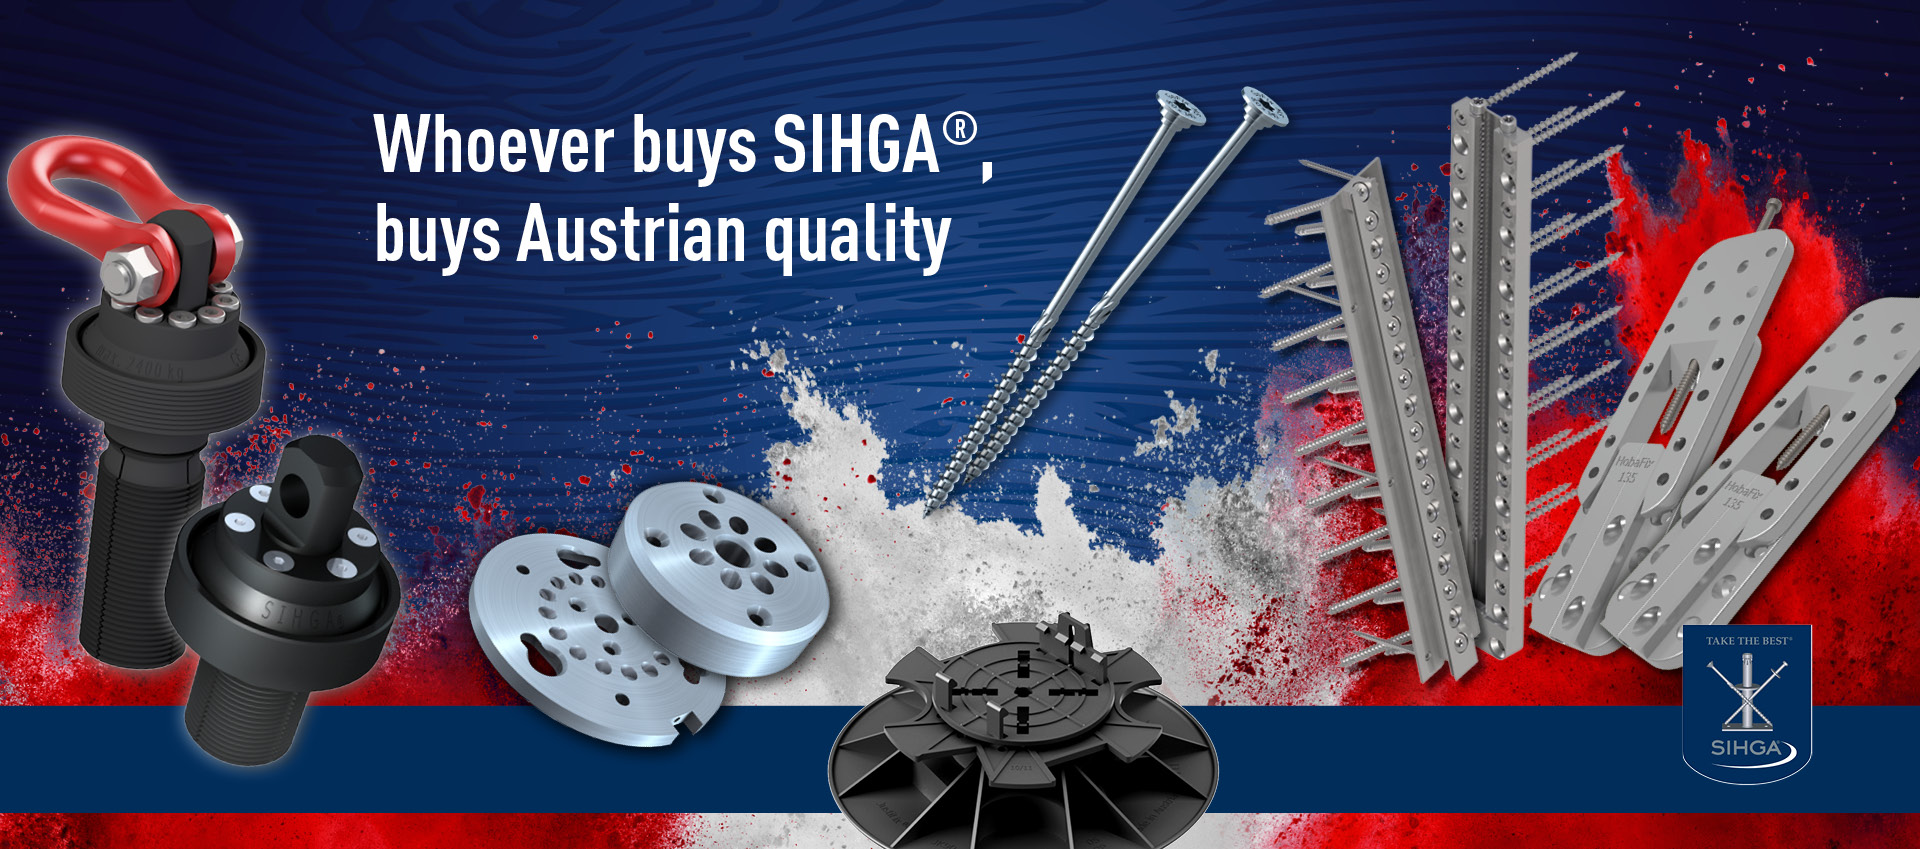 Whoever buys SIHGA®, buys Austrian quality